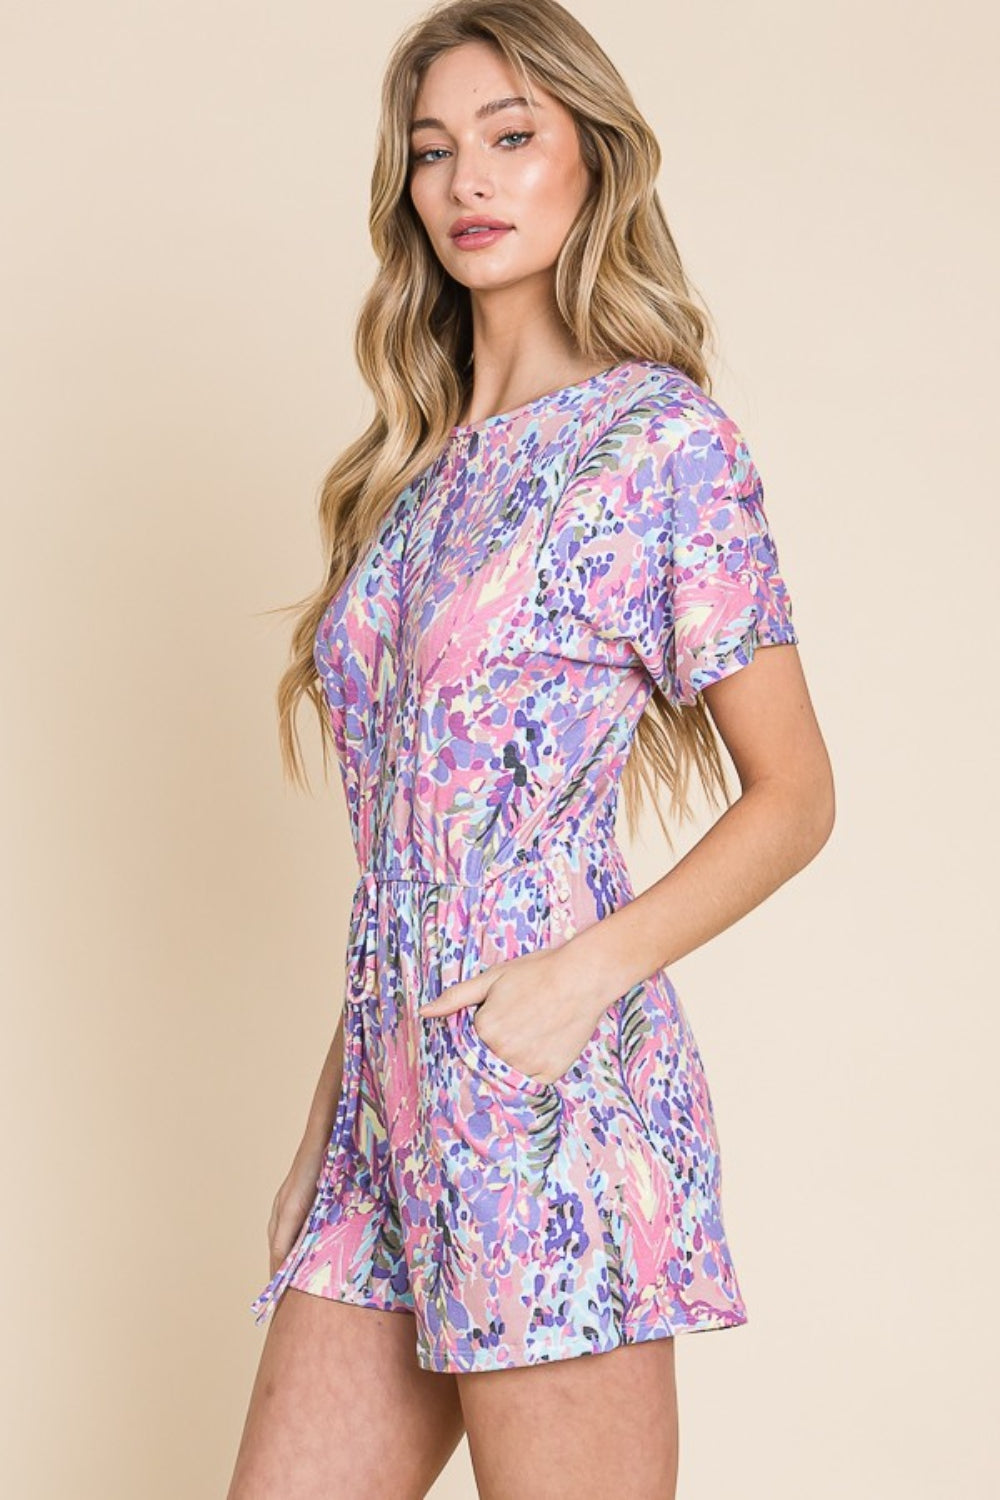 BOMBOM Print Short Sleeve Romper with Pockets - Three Bears Boutique